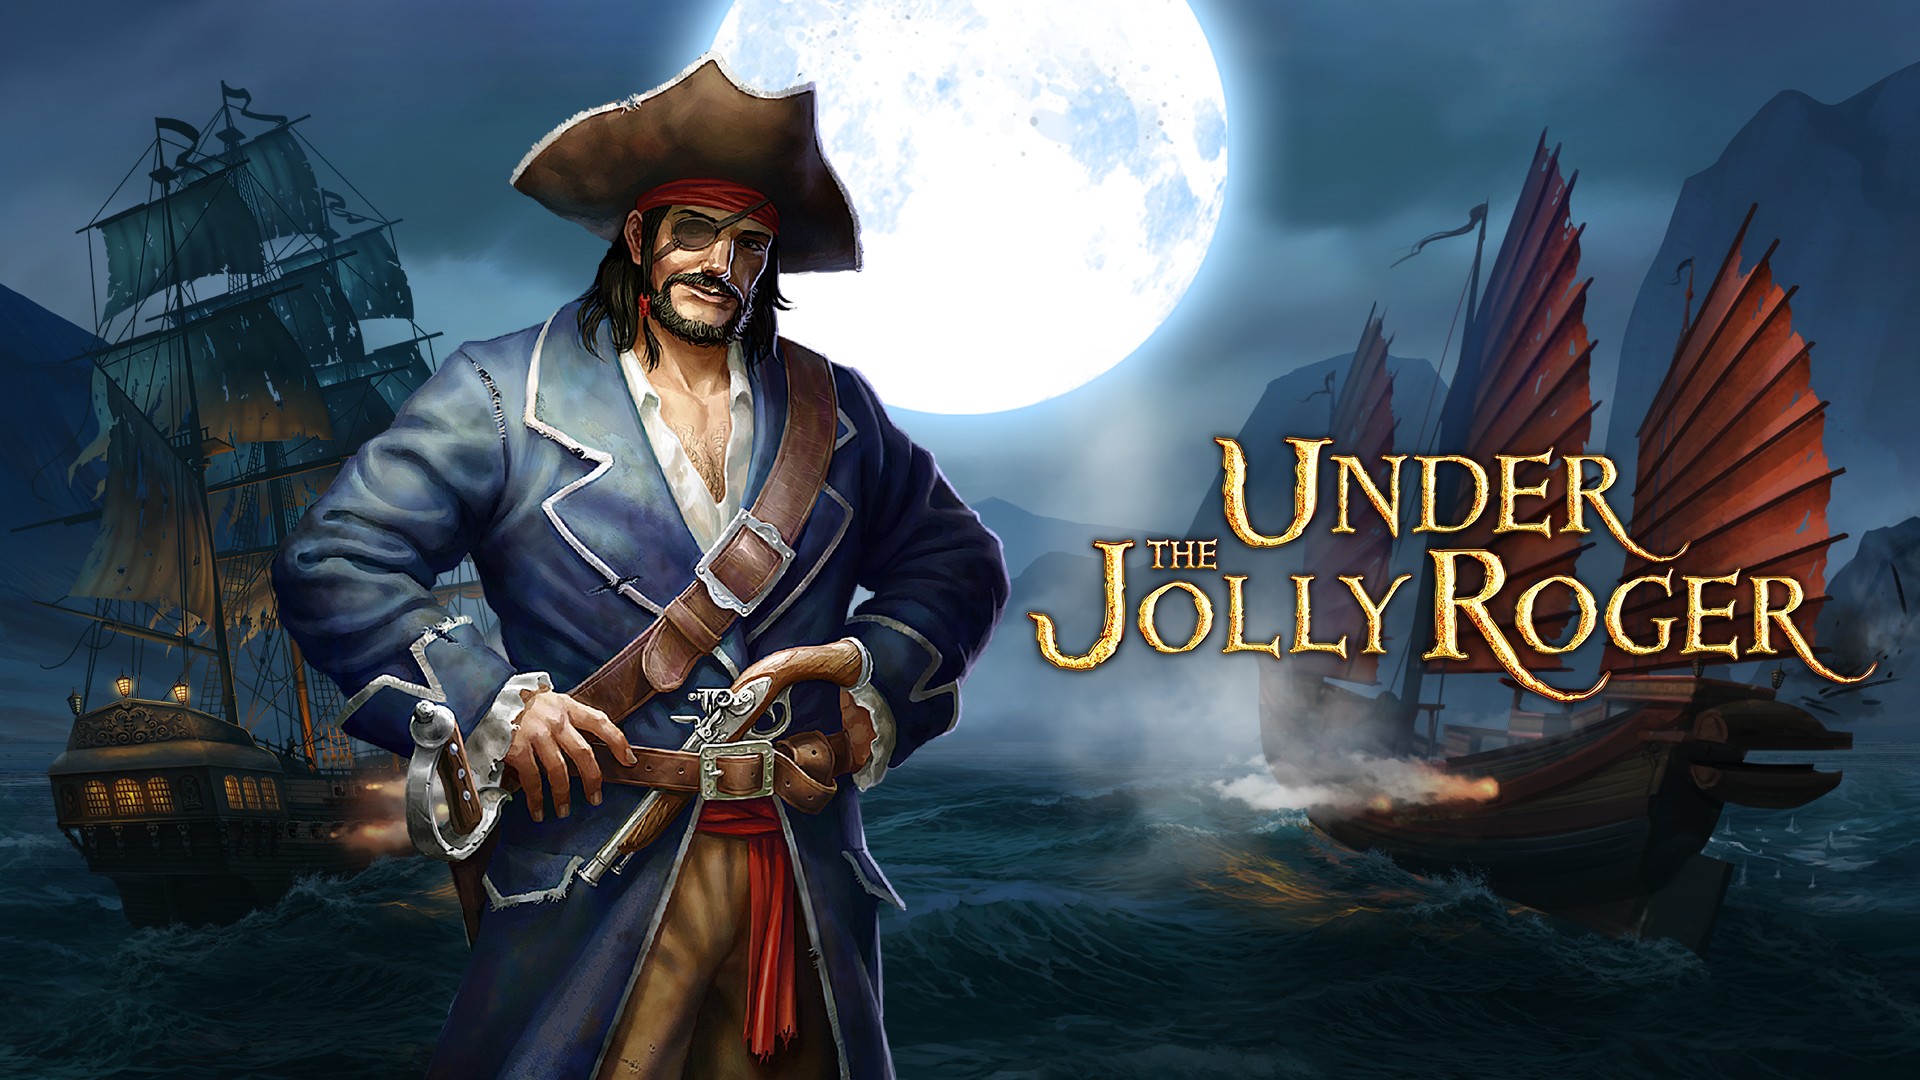 Striped Colonial Prospect Prepare to Sail the Seas in Pirate Action RPG Under the Jolly Roger - Xbox  Wire